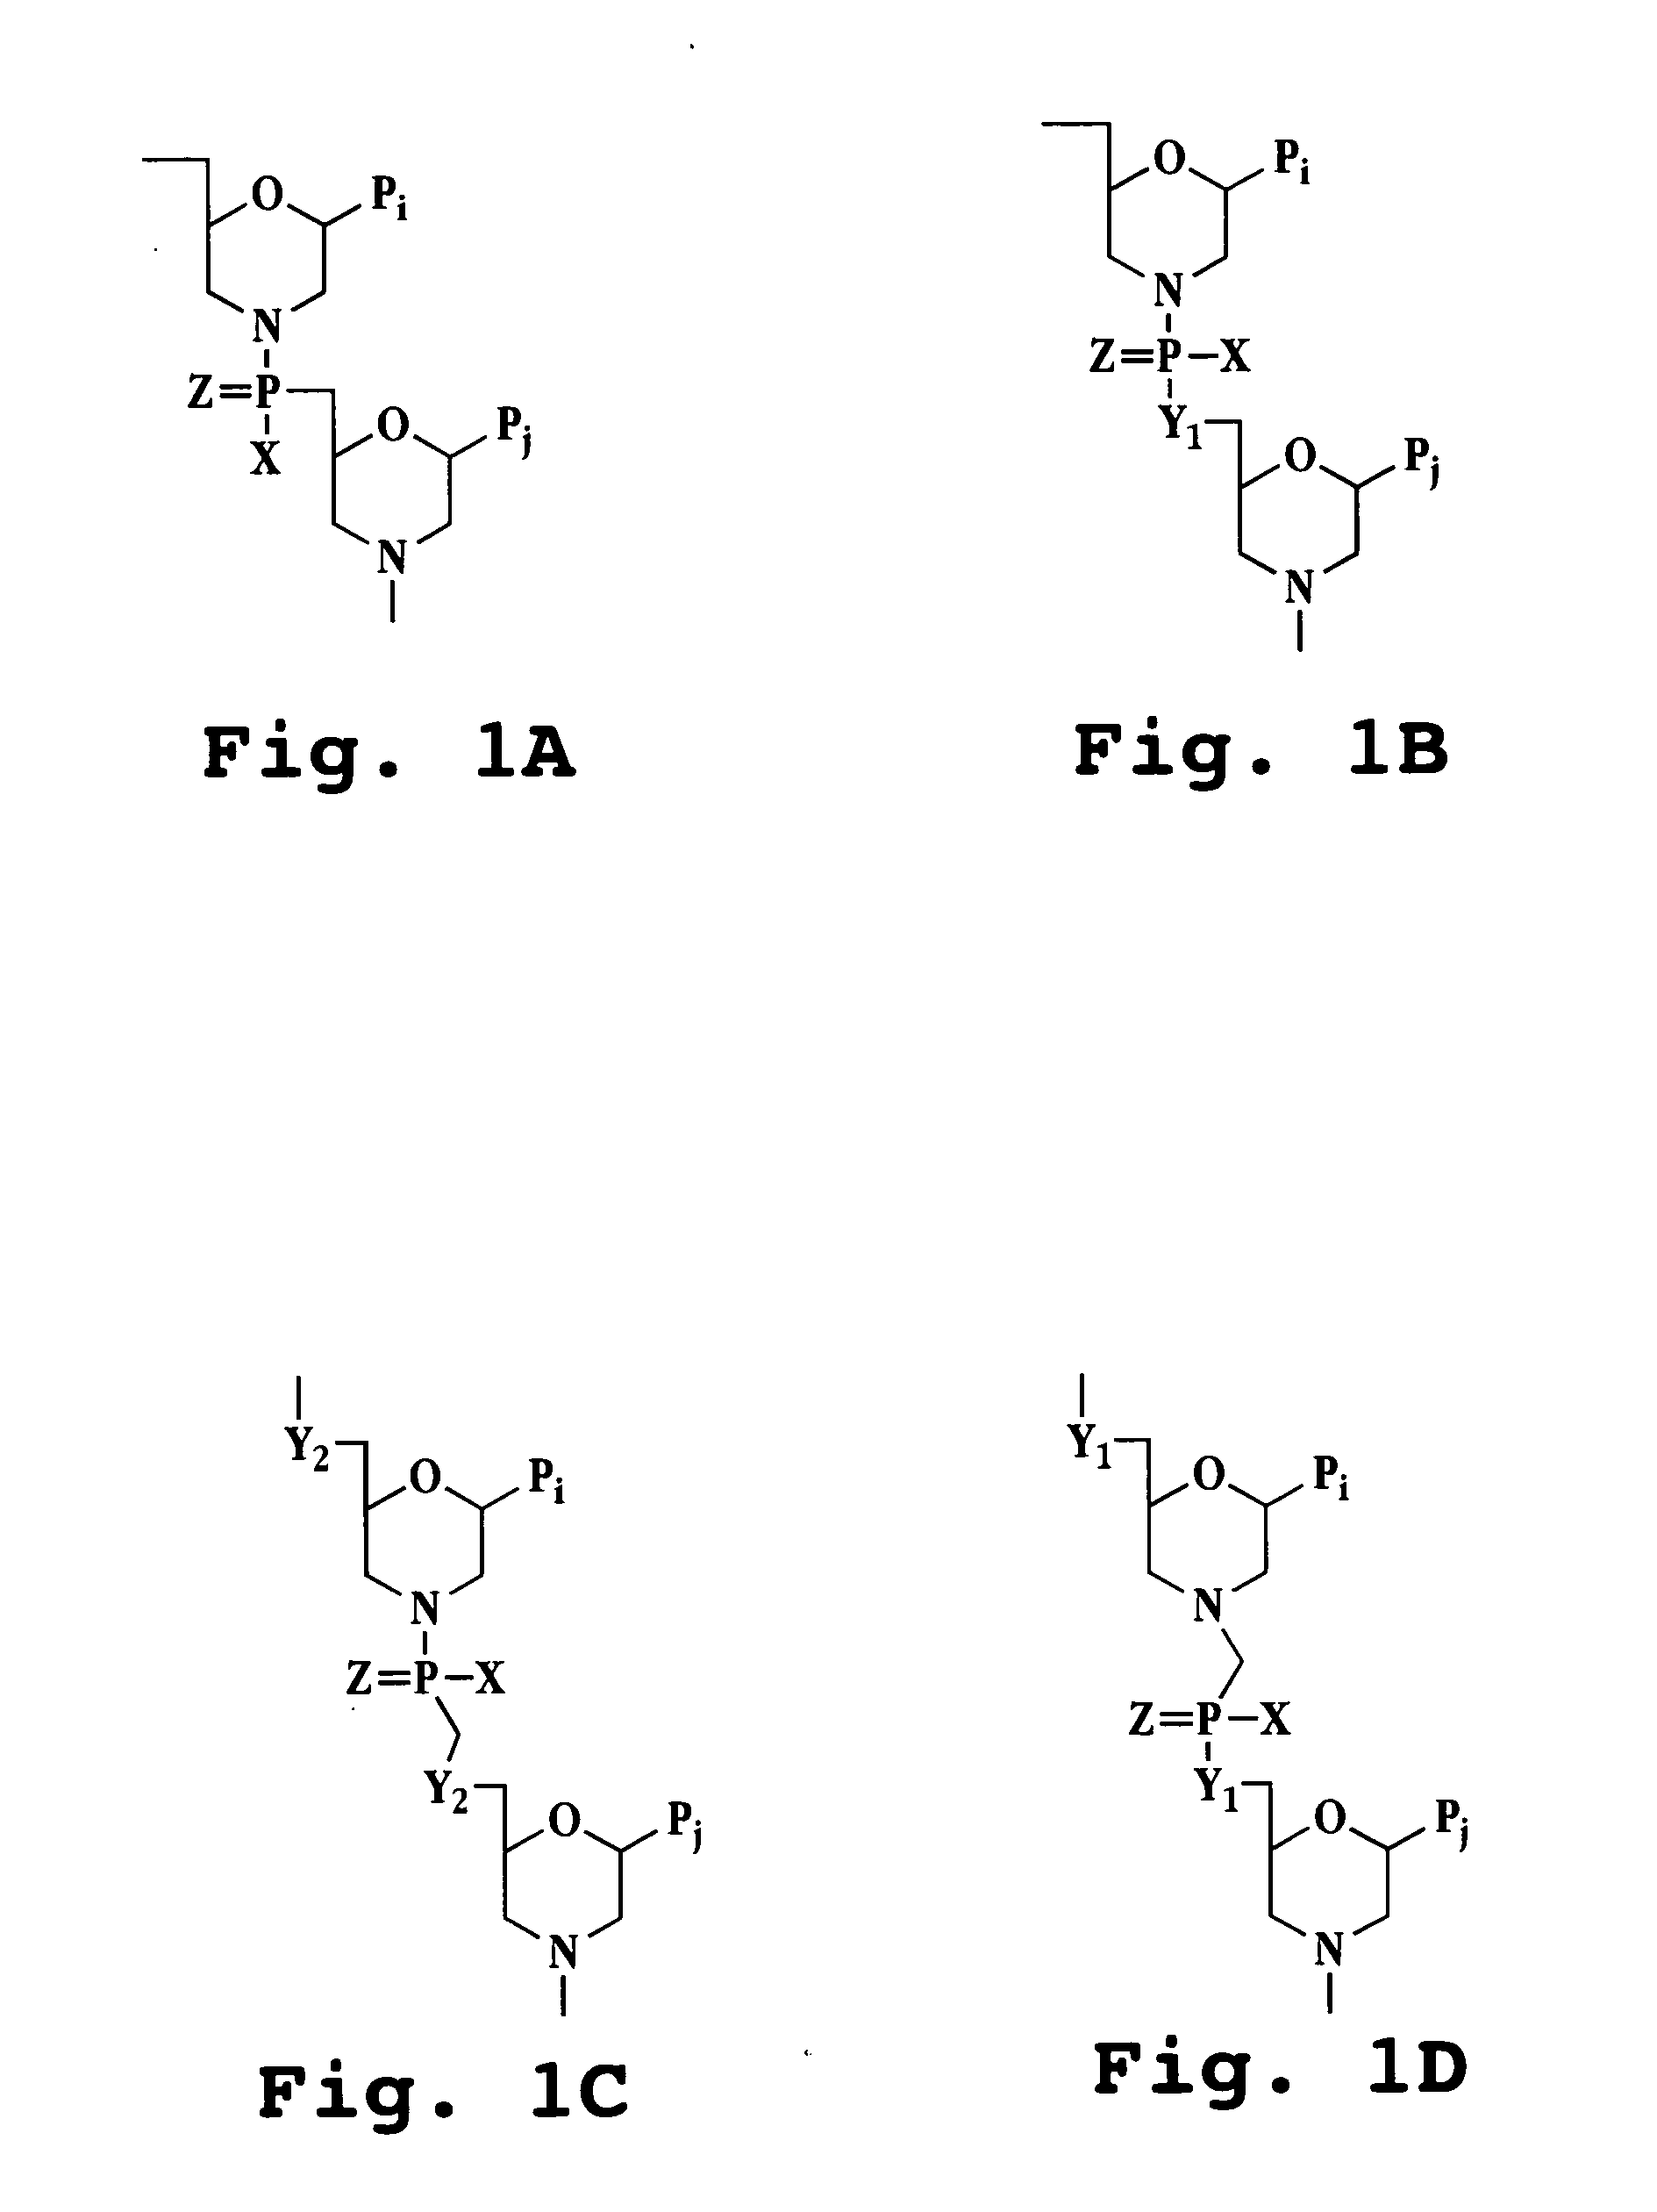 Antisense antiviral compounds and methods for treating a filovirus infection